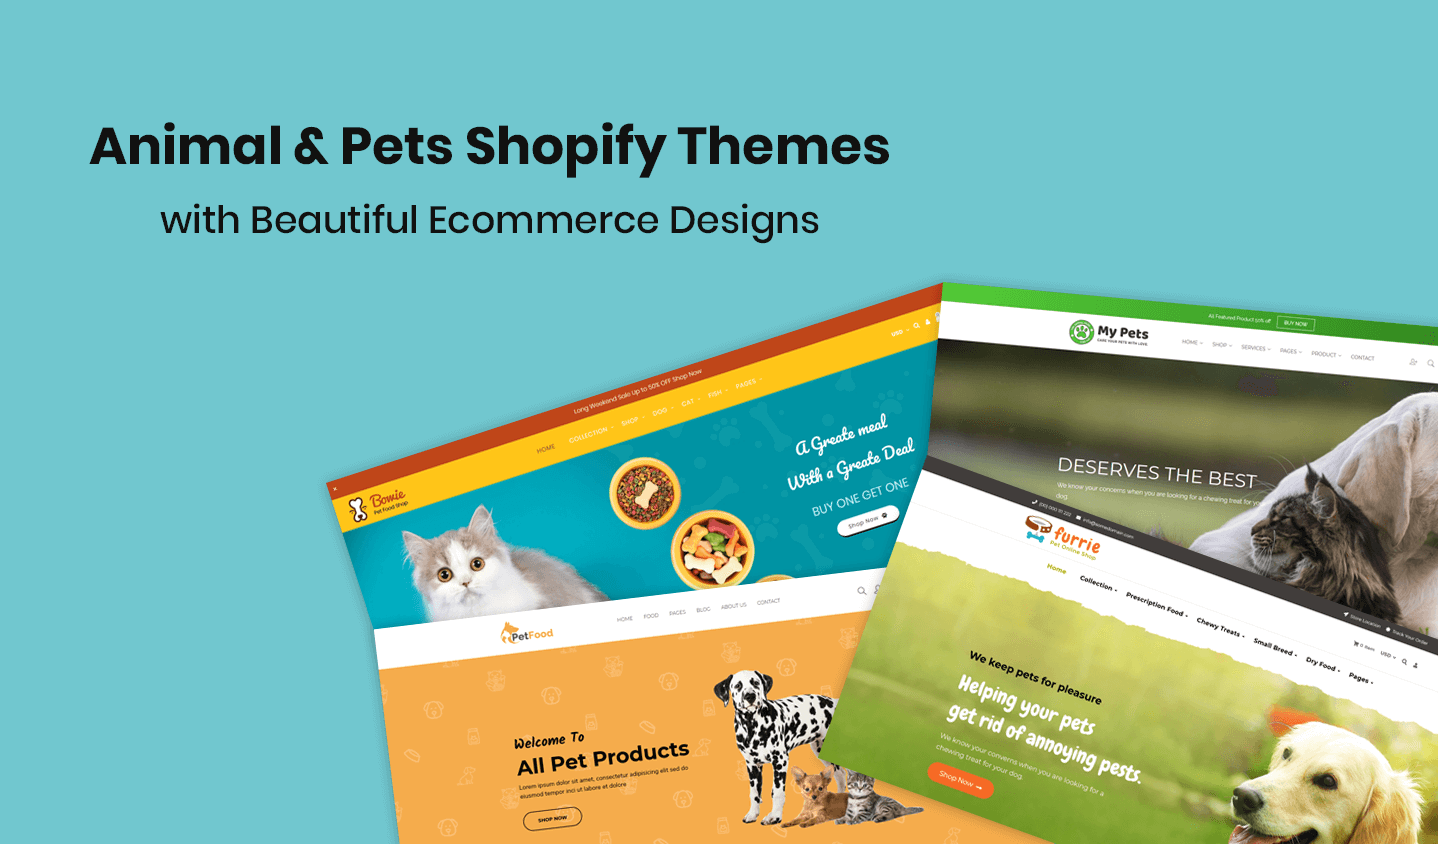 Animal & Pets Shopify Themes with Beautiful Ecommerce Designs